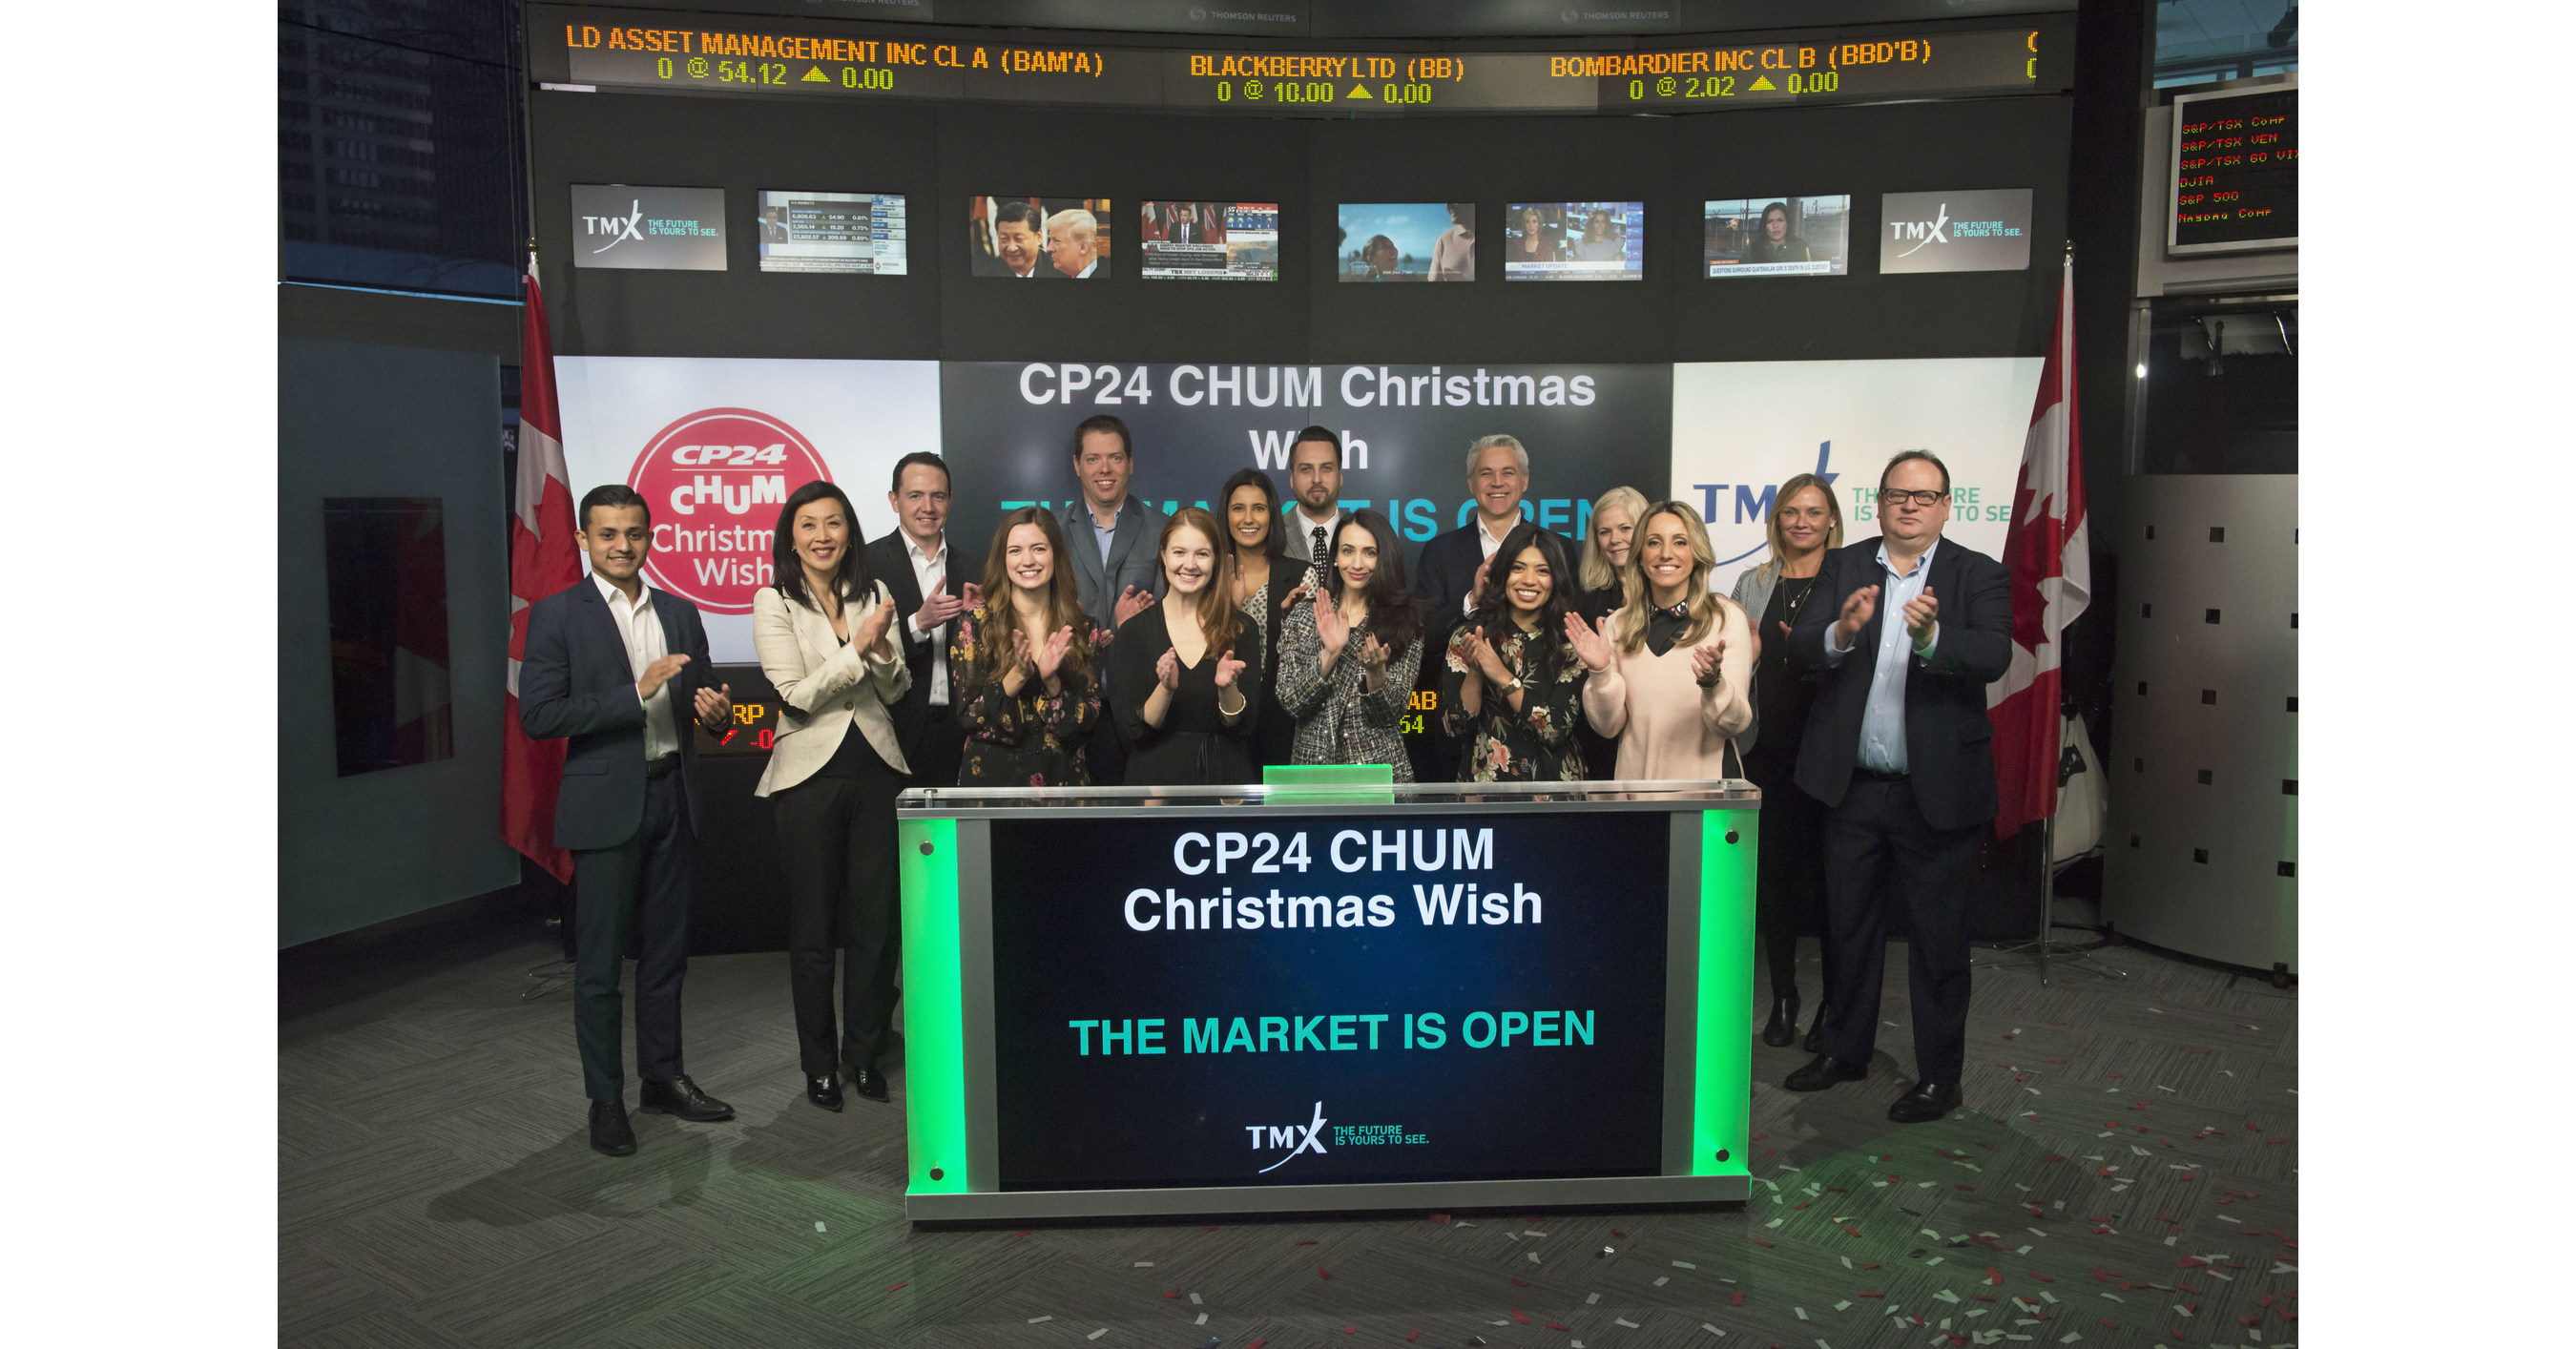 CP24 CHUM Christmas Wish Opens the Market